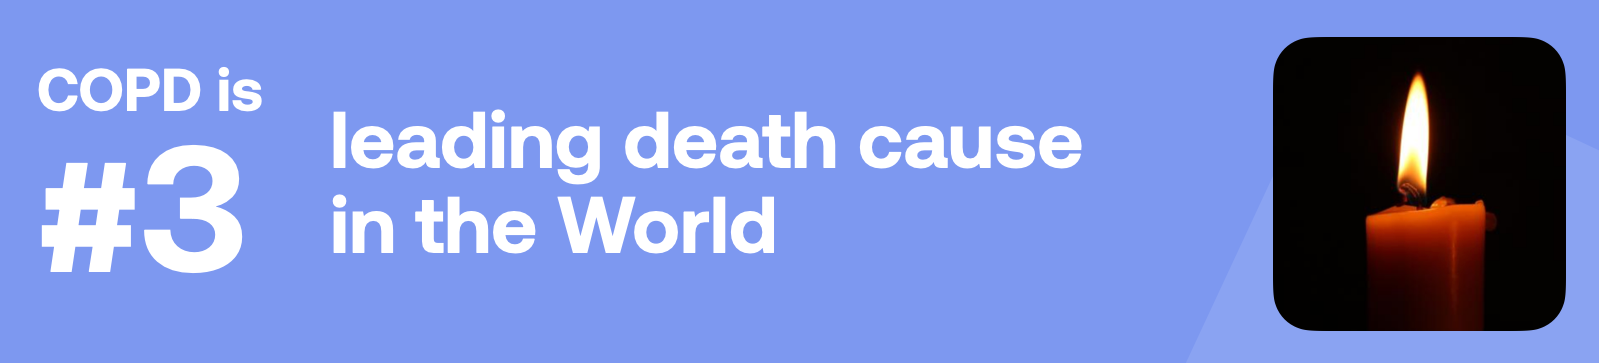 COPD is #3 leading death cause in the World